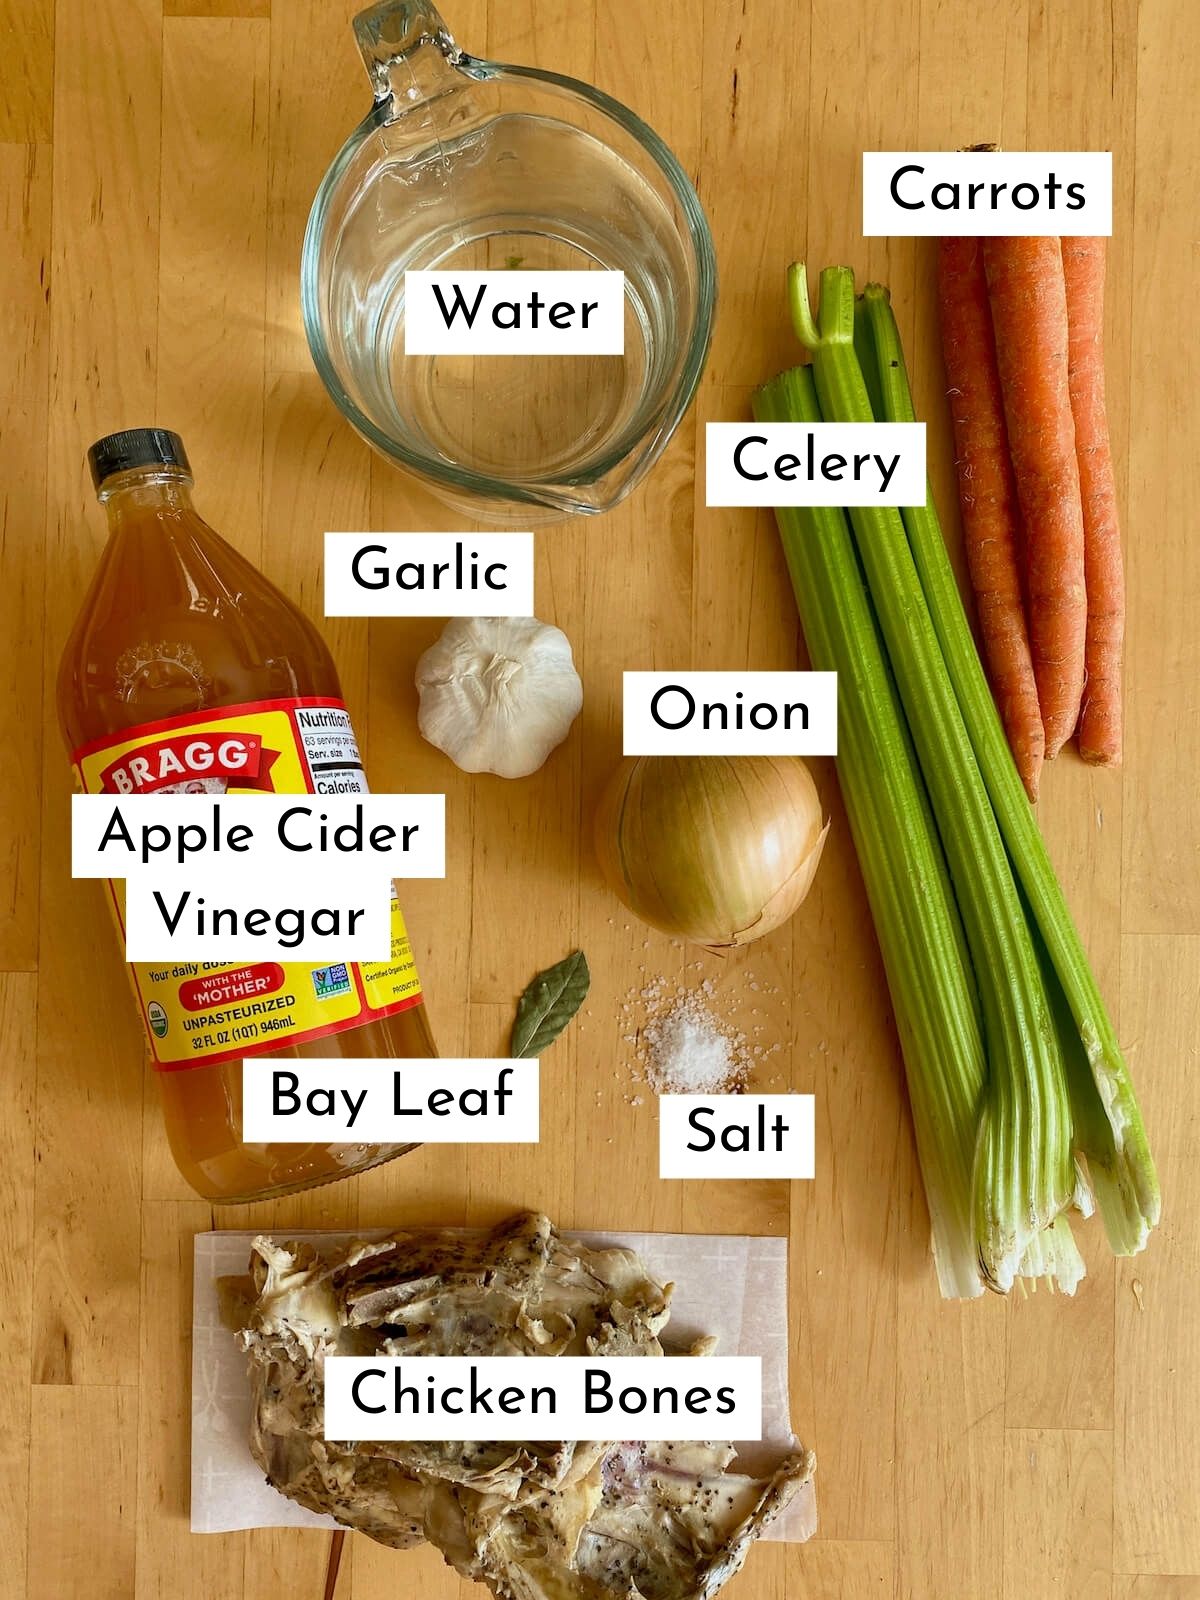 The ingredients to make chicken bone broth. Each ingredient is labeled with text. They include water, carrots, celery, garlic, onion, apple cider vinegar, bay leaf, salt, and chicken bones.